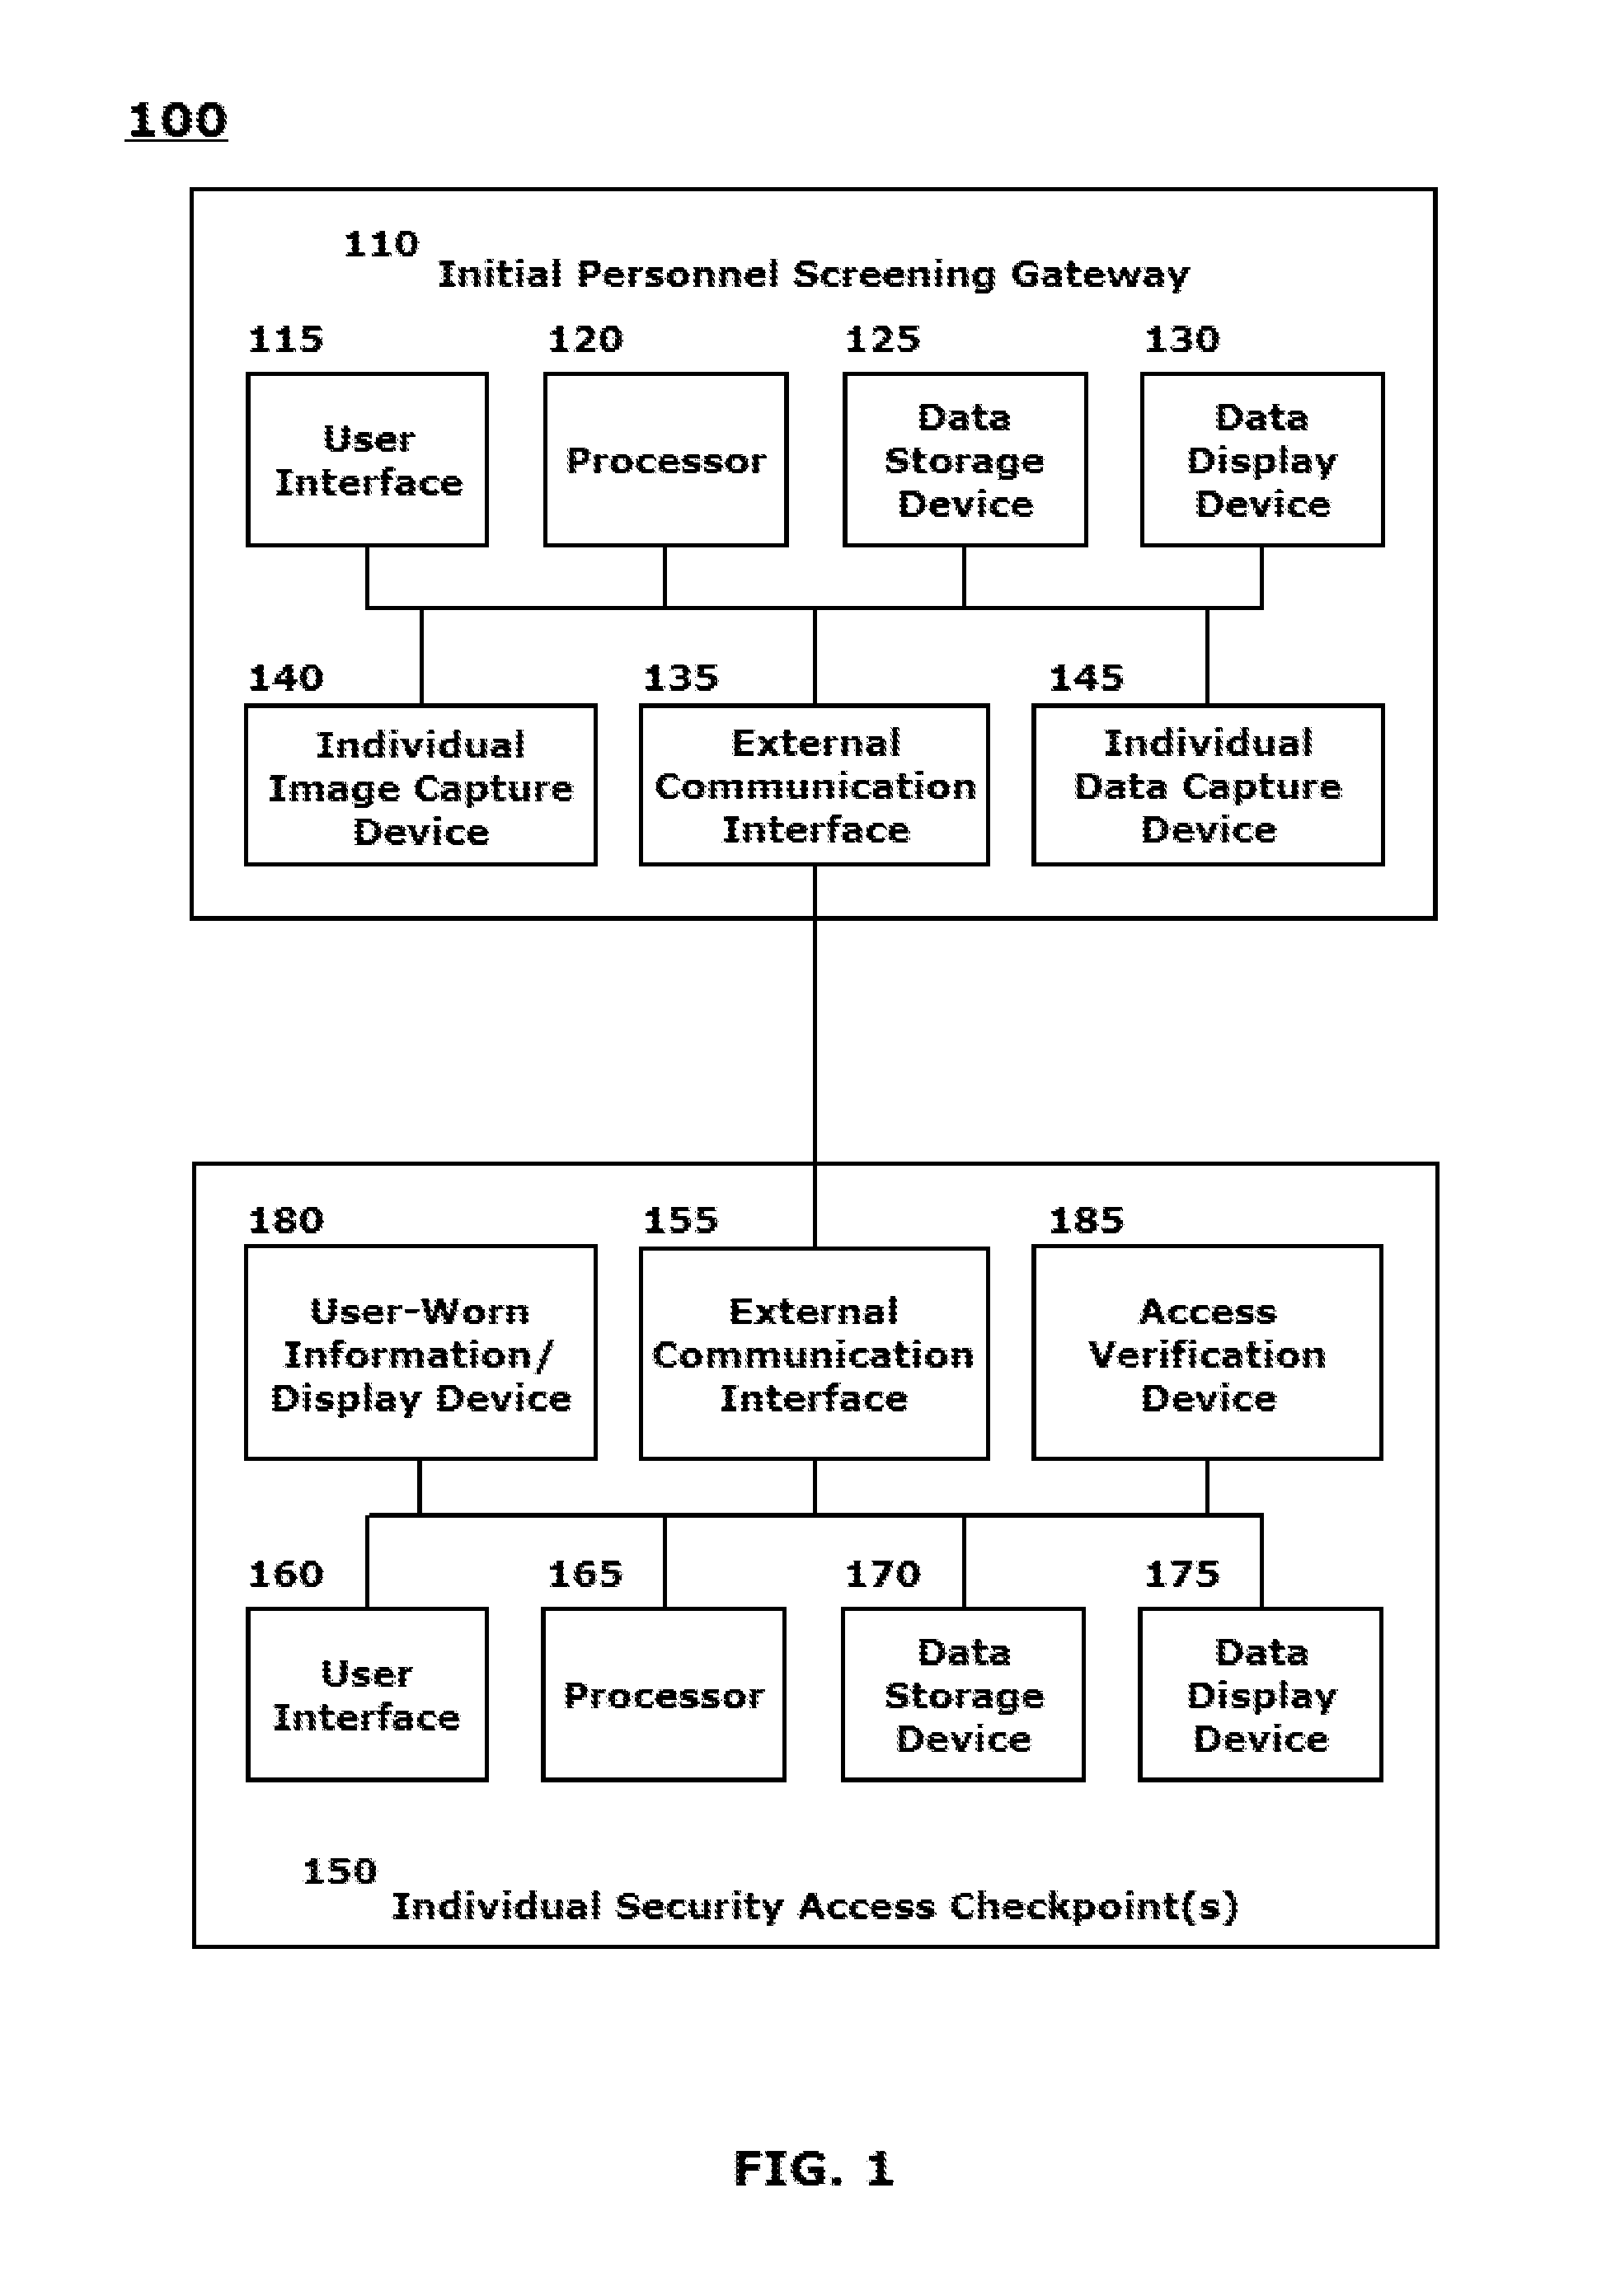 Image capture and individual verification security system integrating user-worn display components and communication technologies